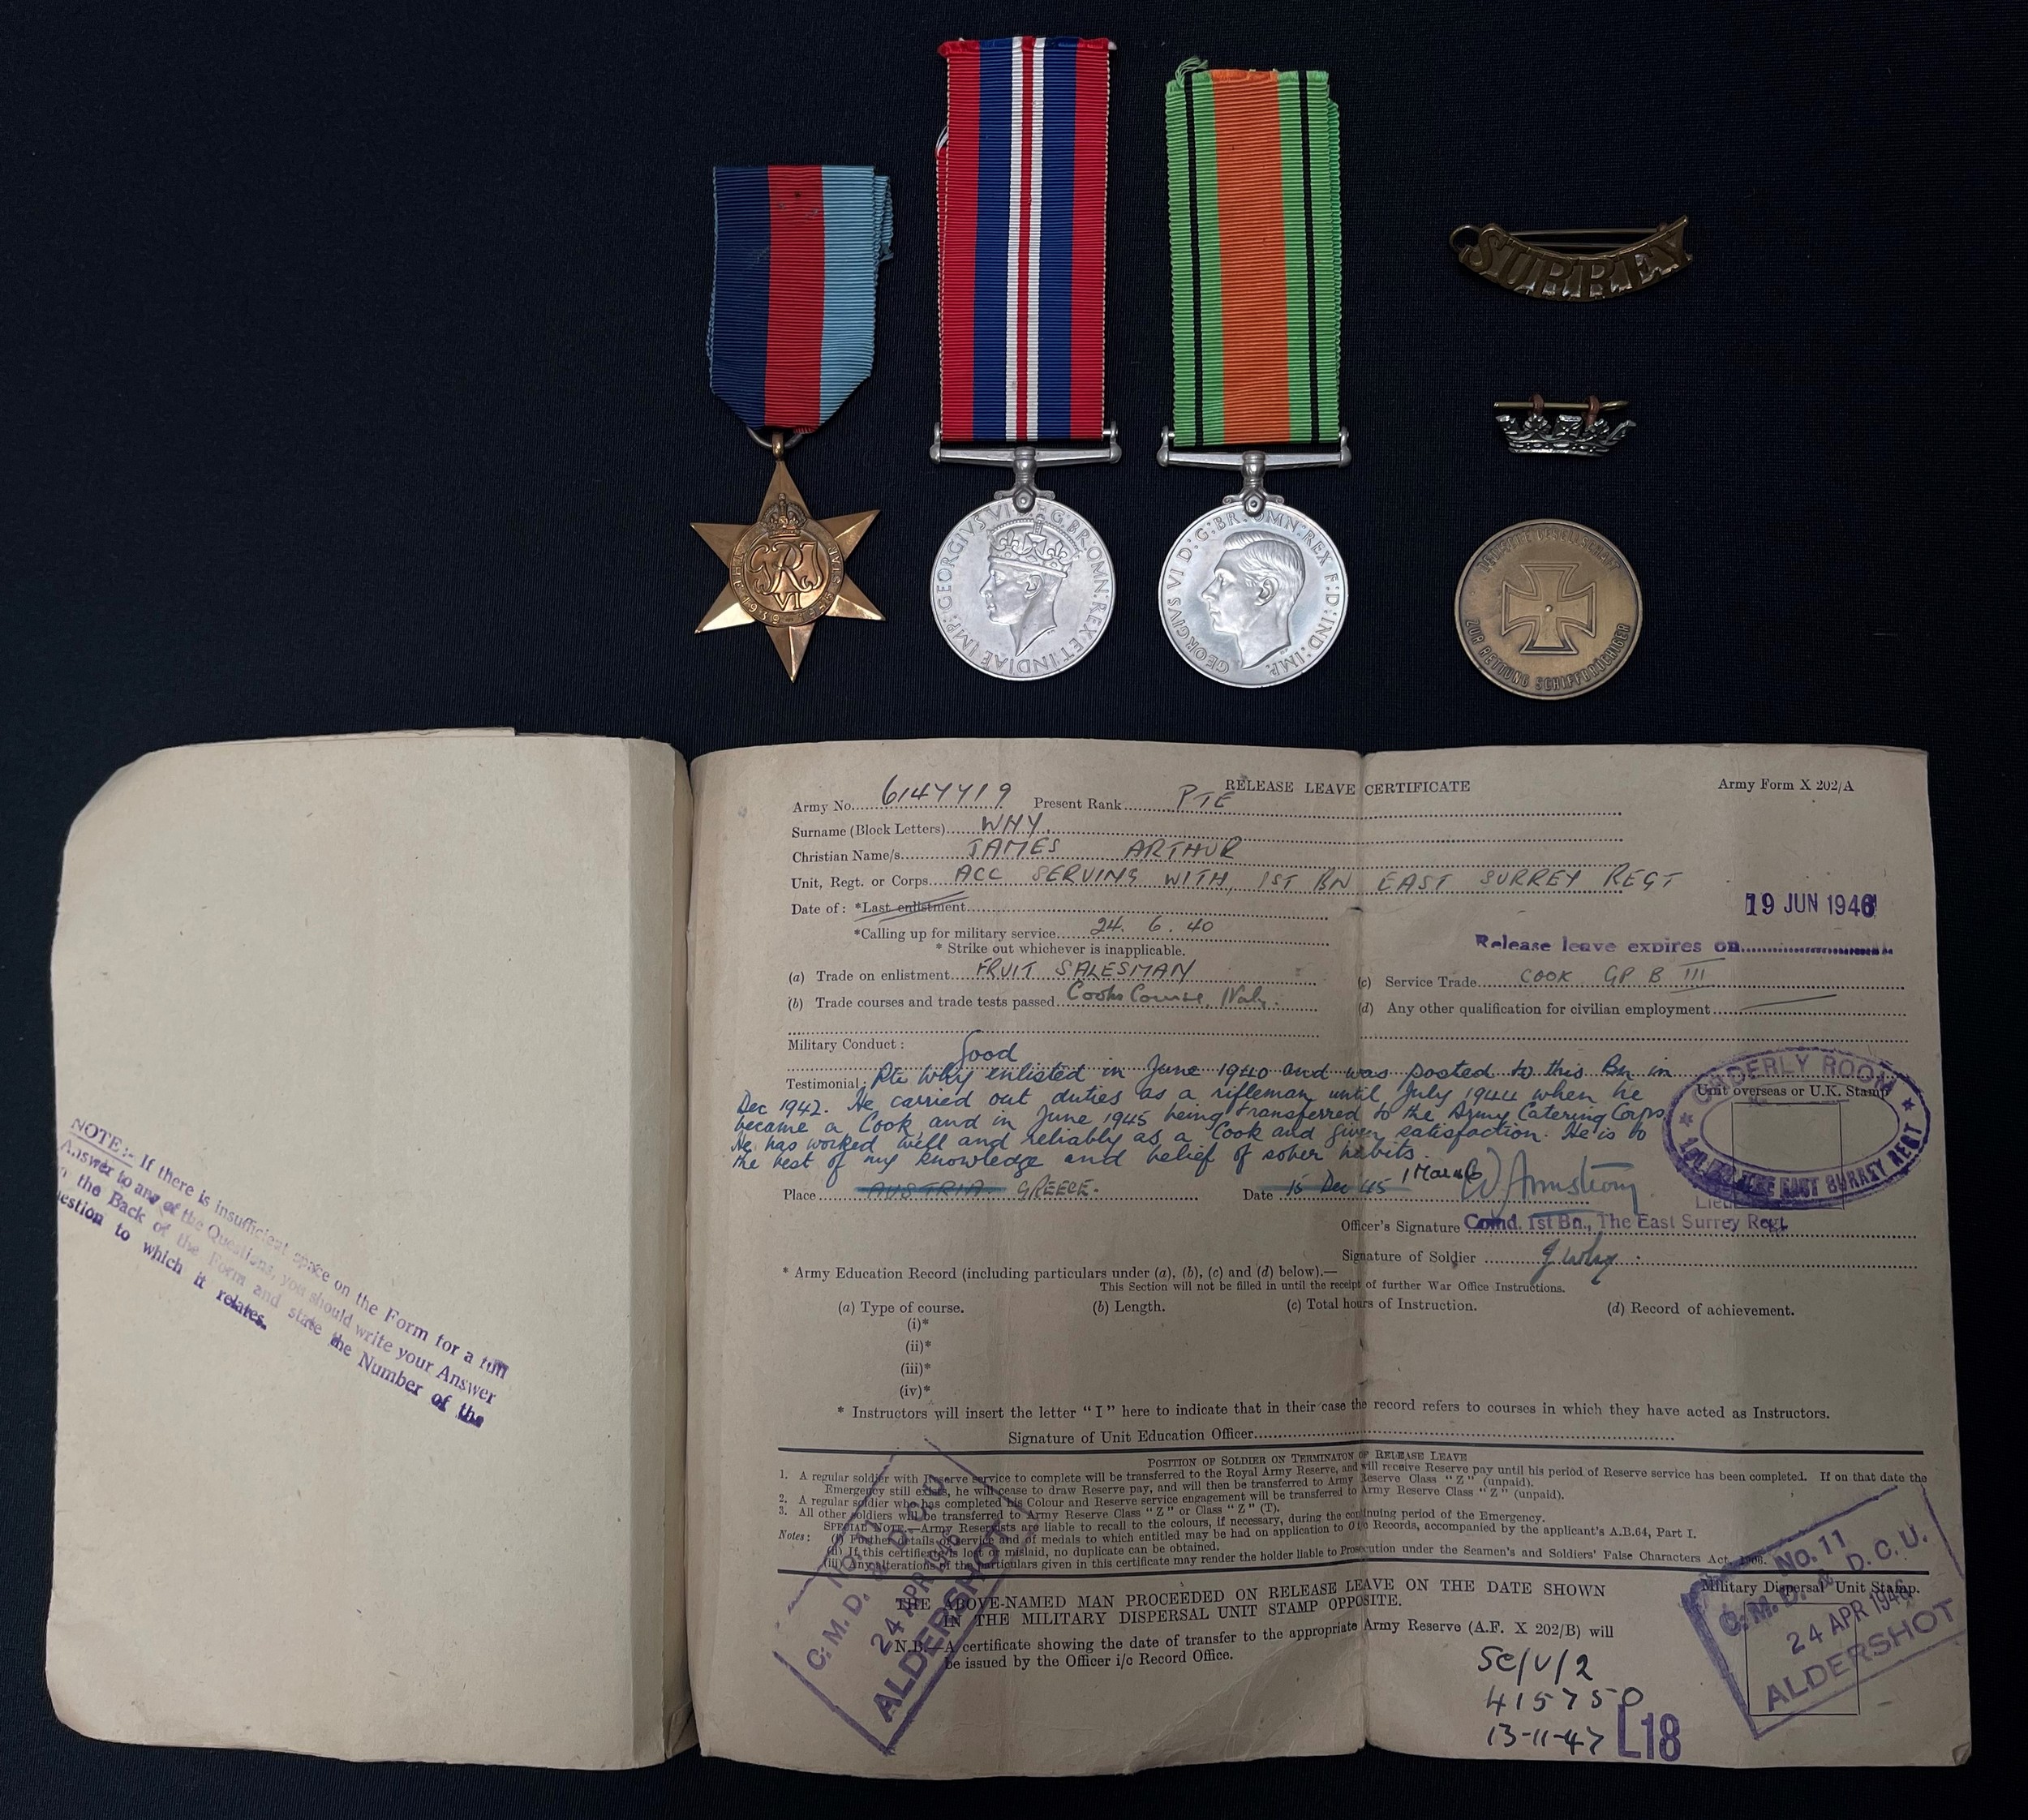 WW2 British Medal Group comprising of 1939-45 Star, War Medal and Defence Medal to 6147719 Pte James